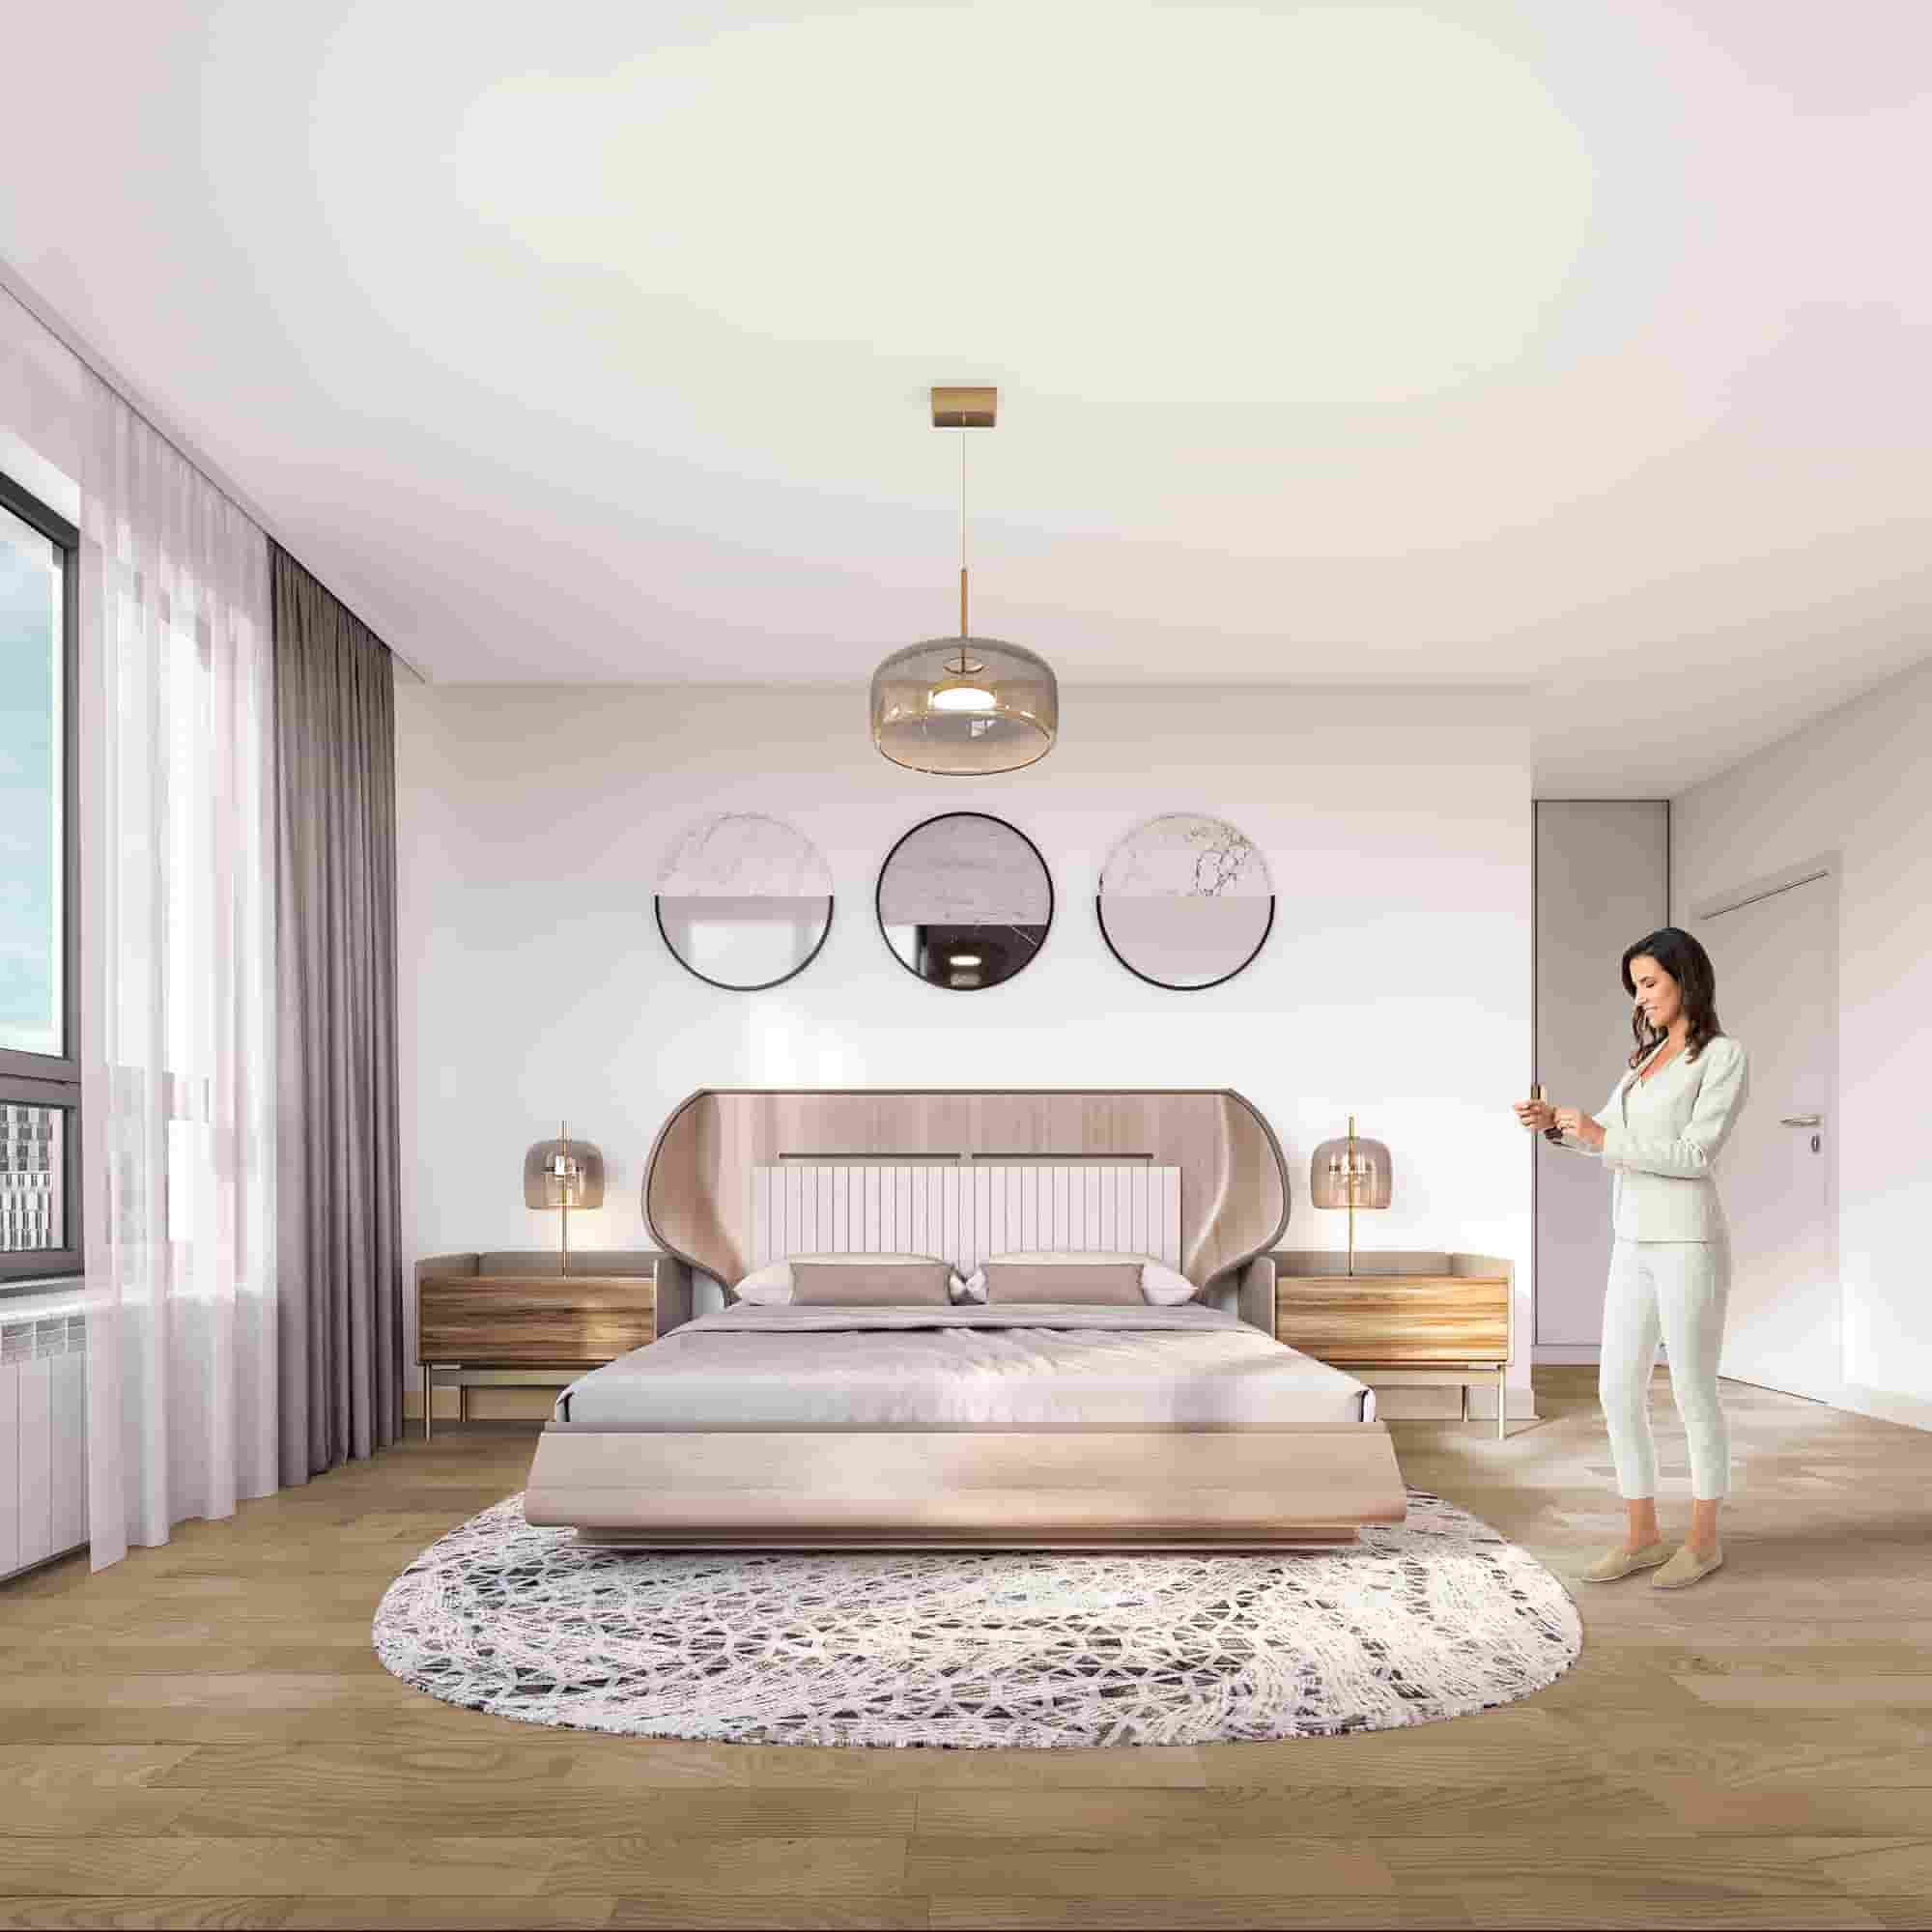 BW_P23_QU4_Master Bedroom with people 5K_low_65202a46bc449.jpg